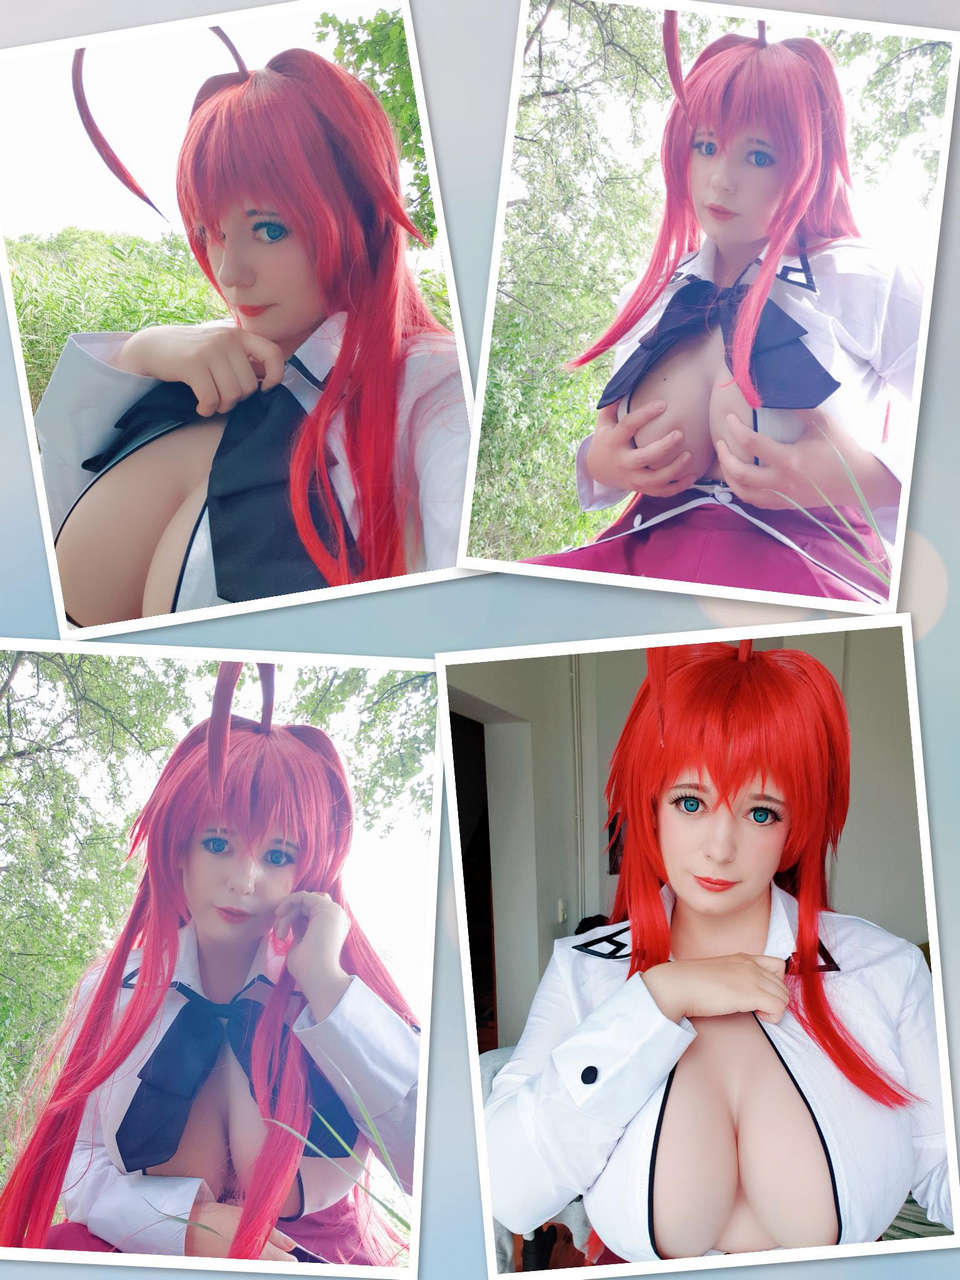 Big Oppai Are Best Oppai Rias Gremory By Lysand